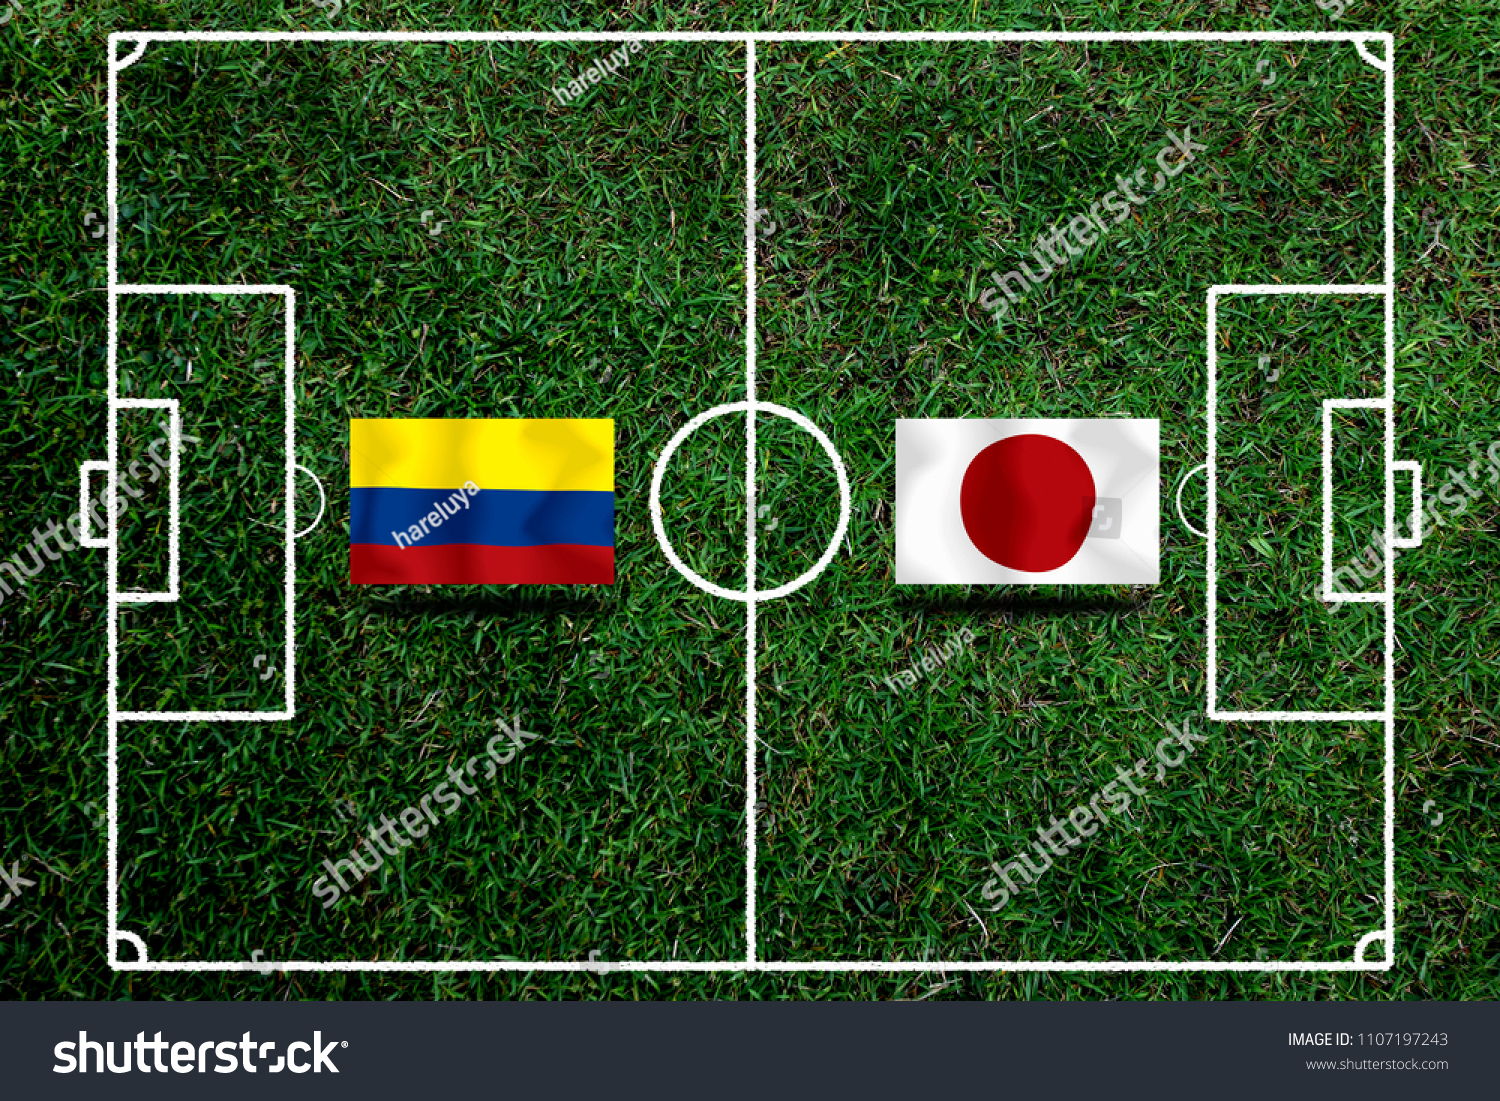 Football Cup competition between the national Colombia and national Japan. #1107197243